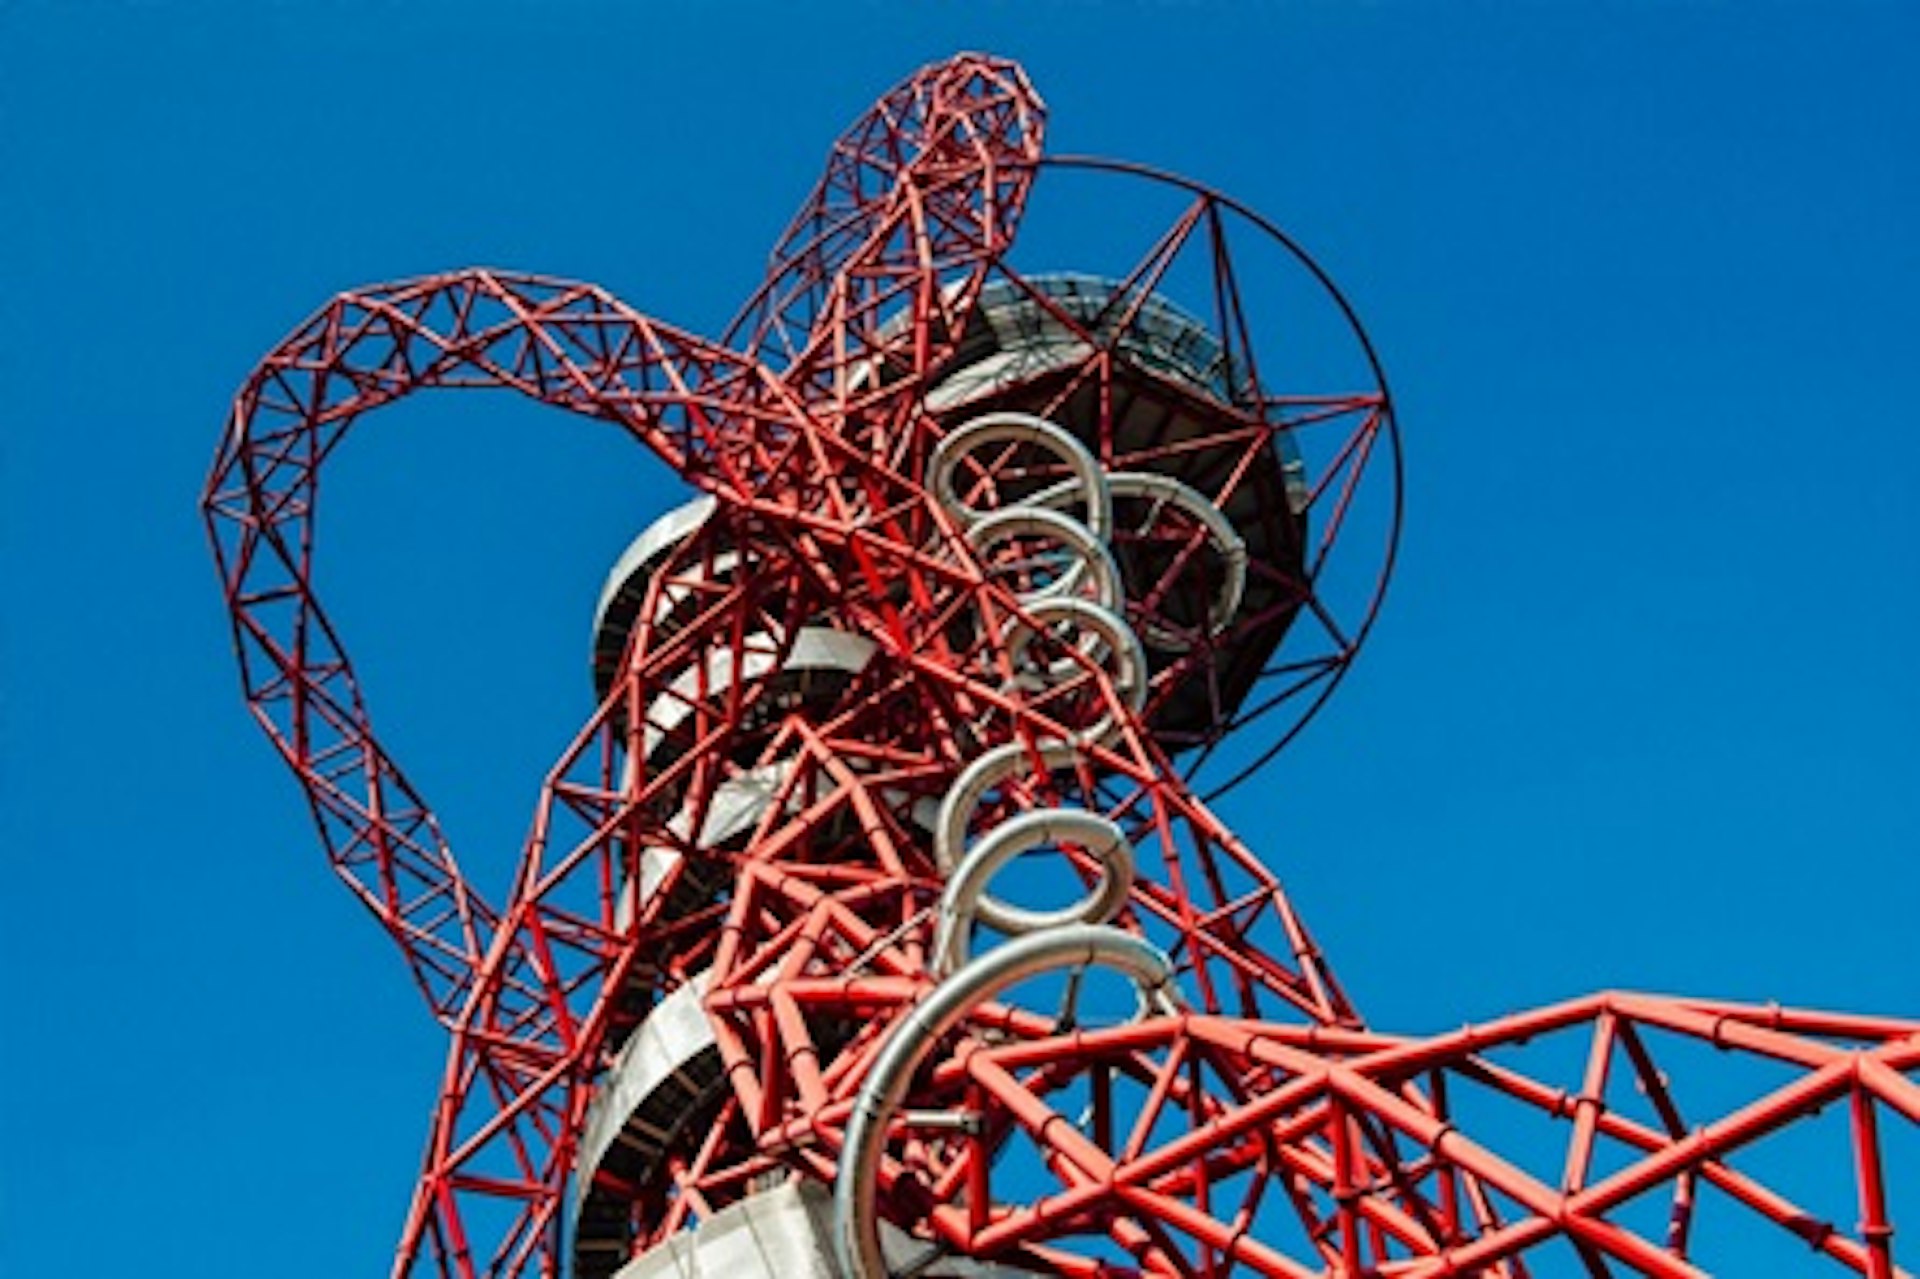 The Slide at The ArcelorMittal Orbit with Cake and Hot Drink for Two 1